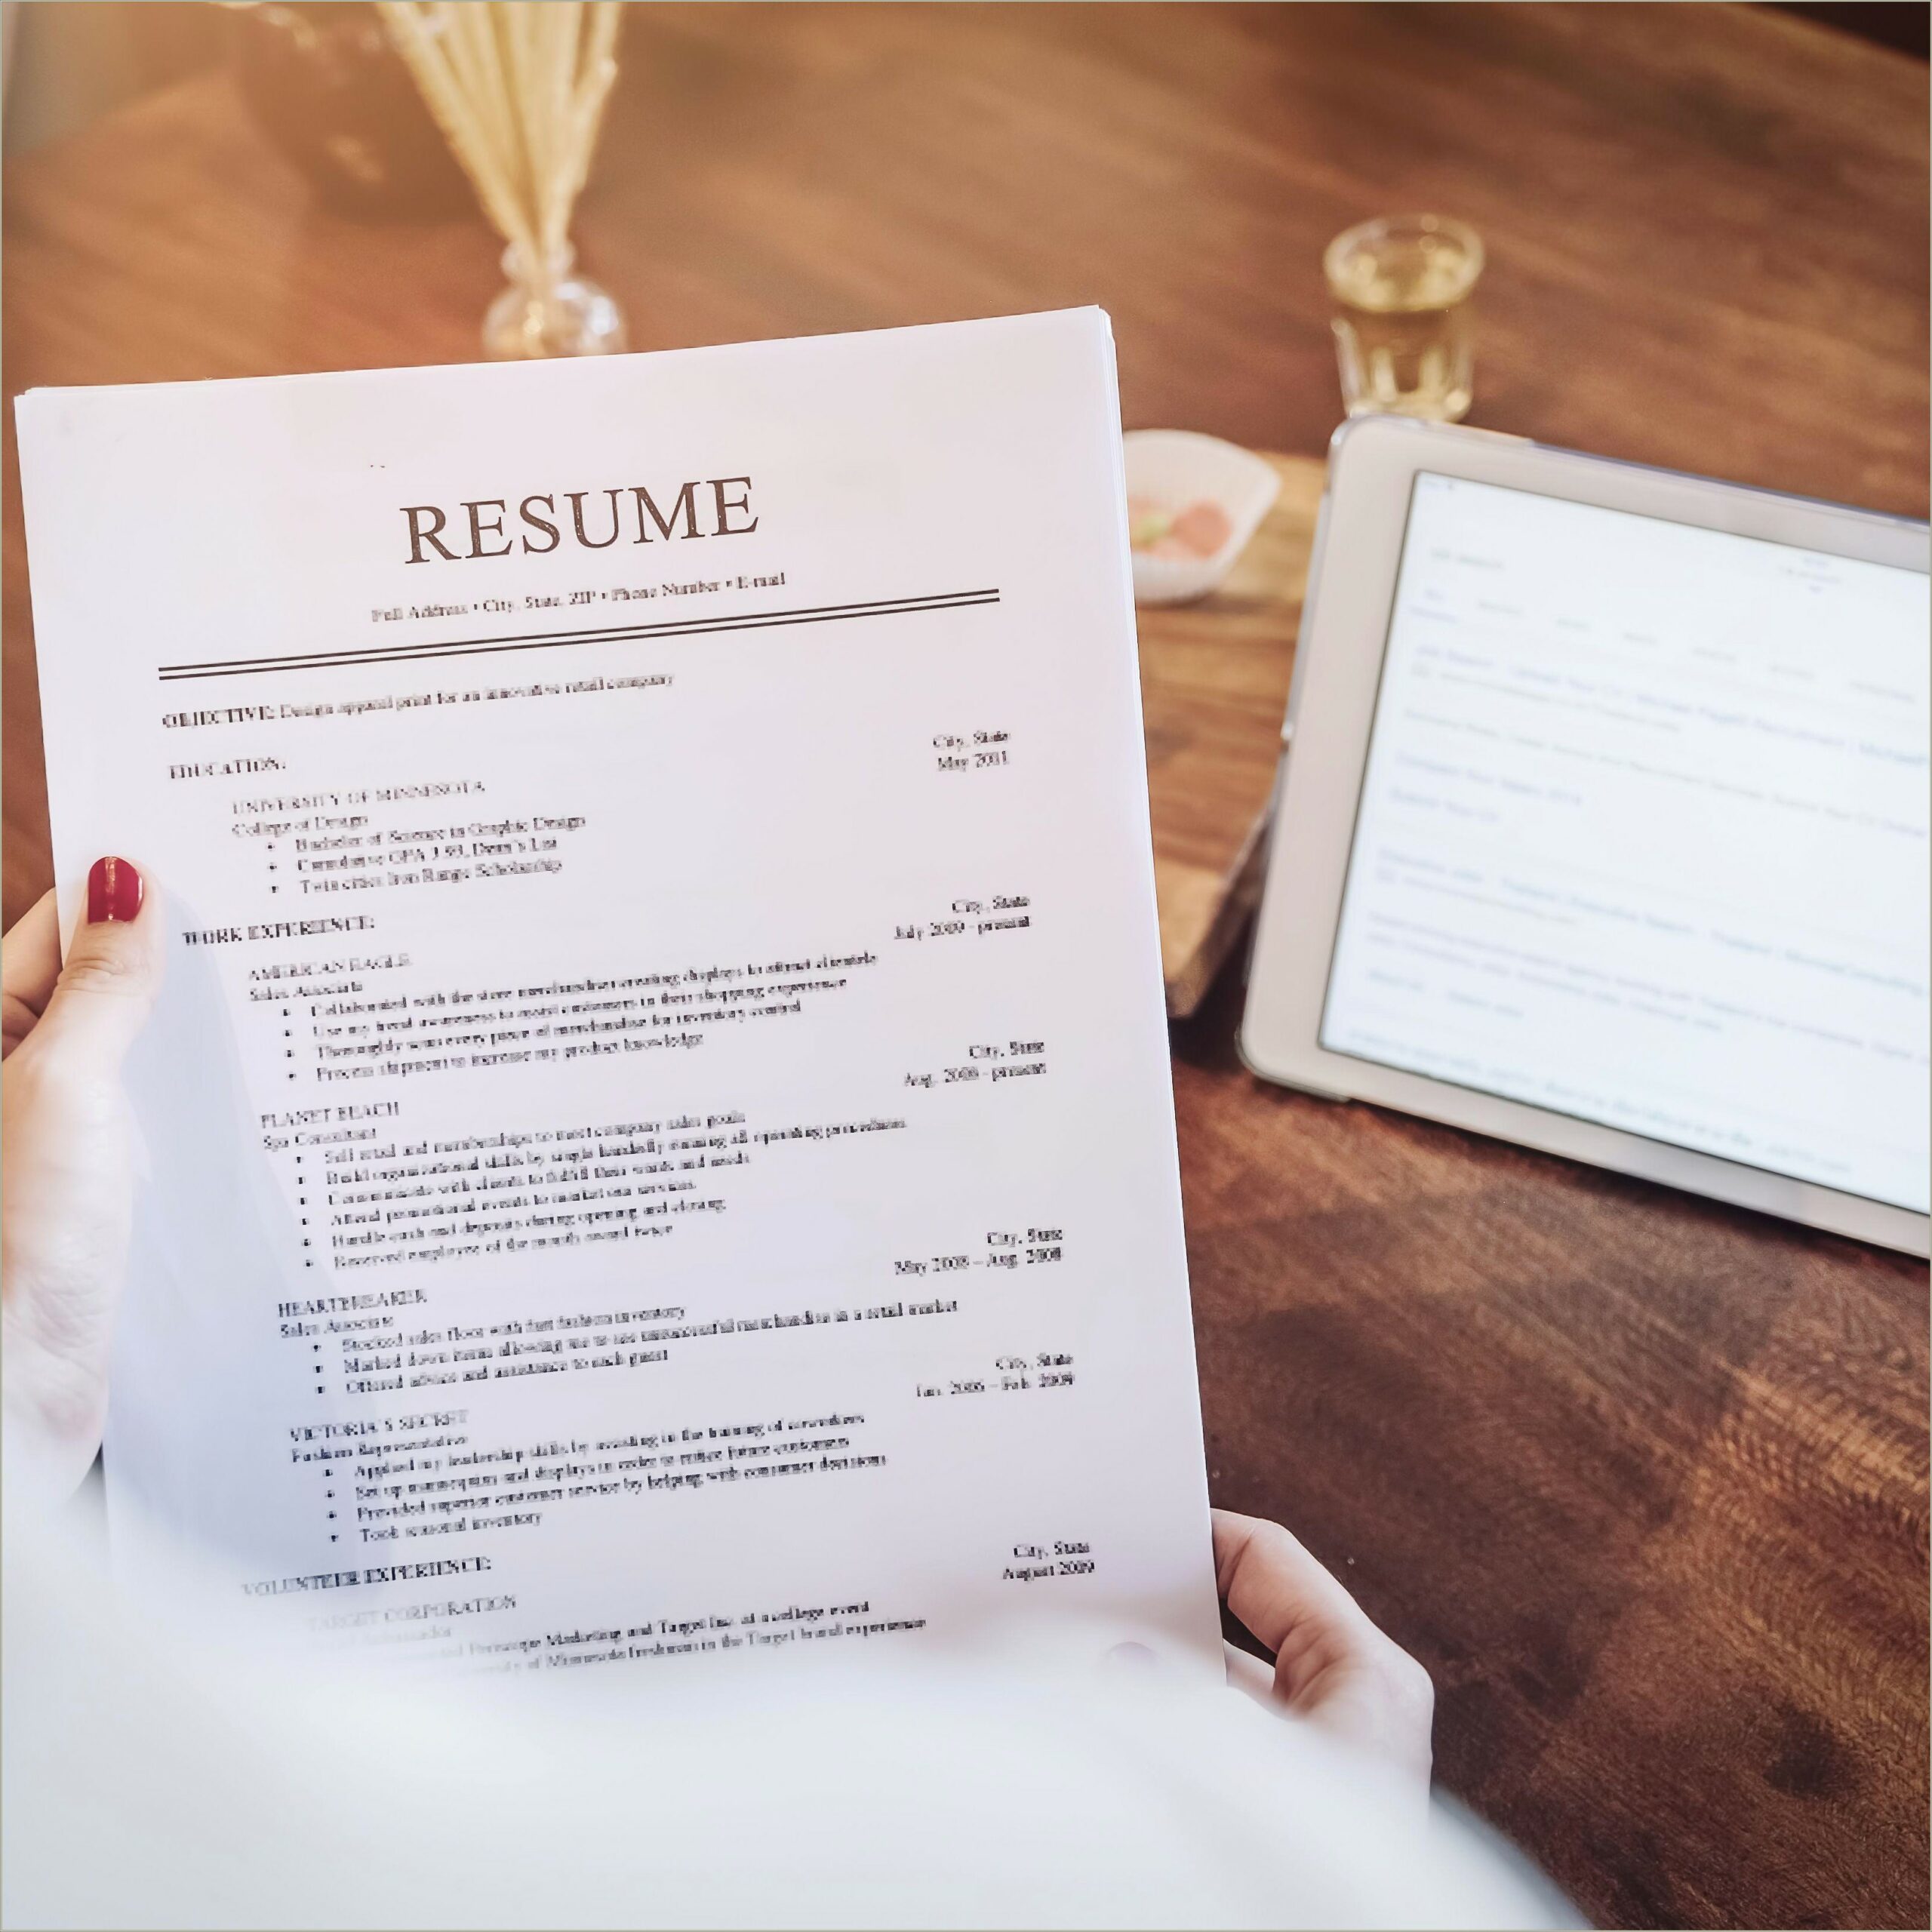 Online Jobs That Don T Need A Resume